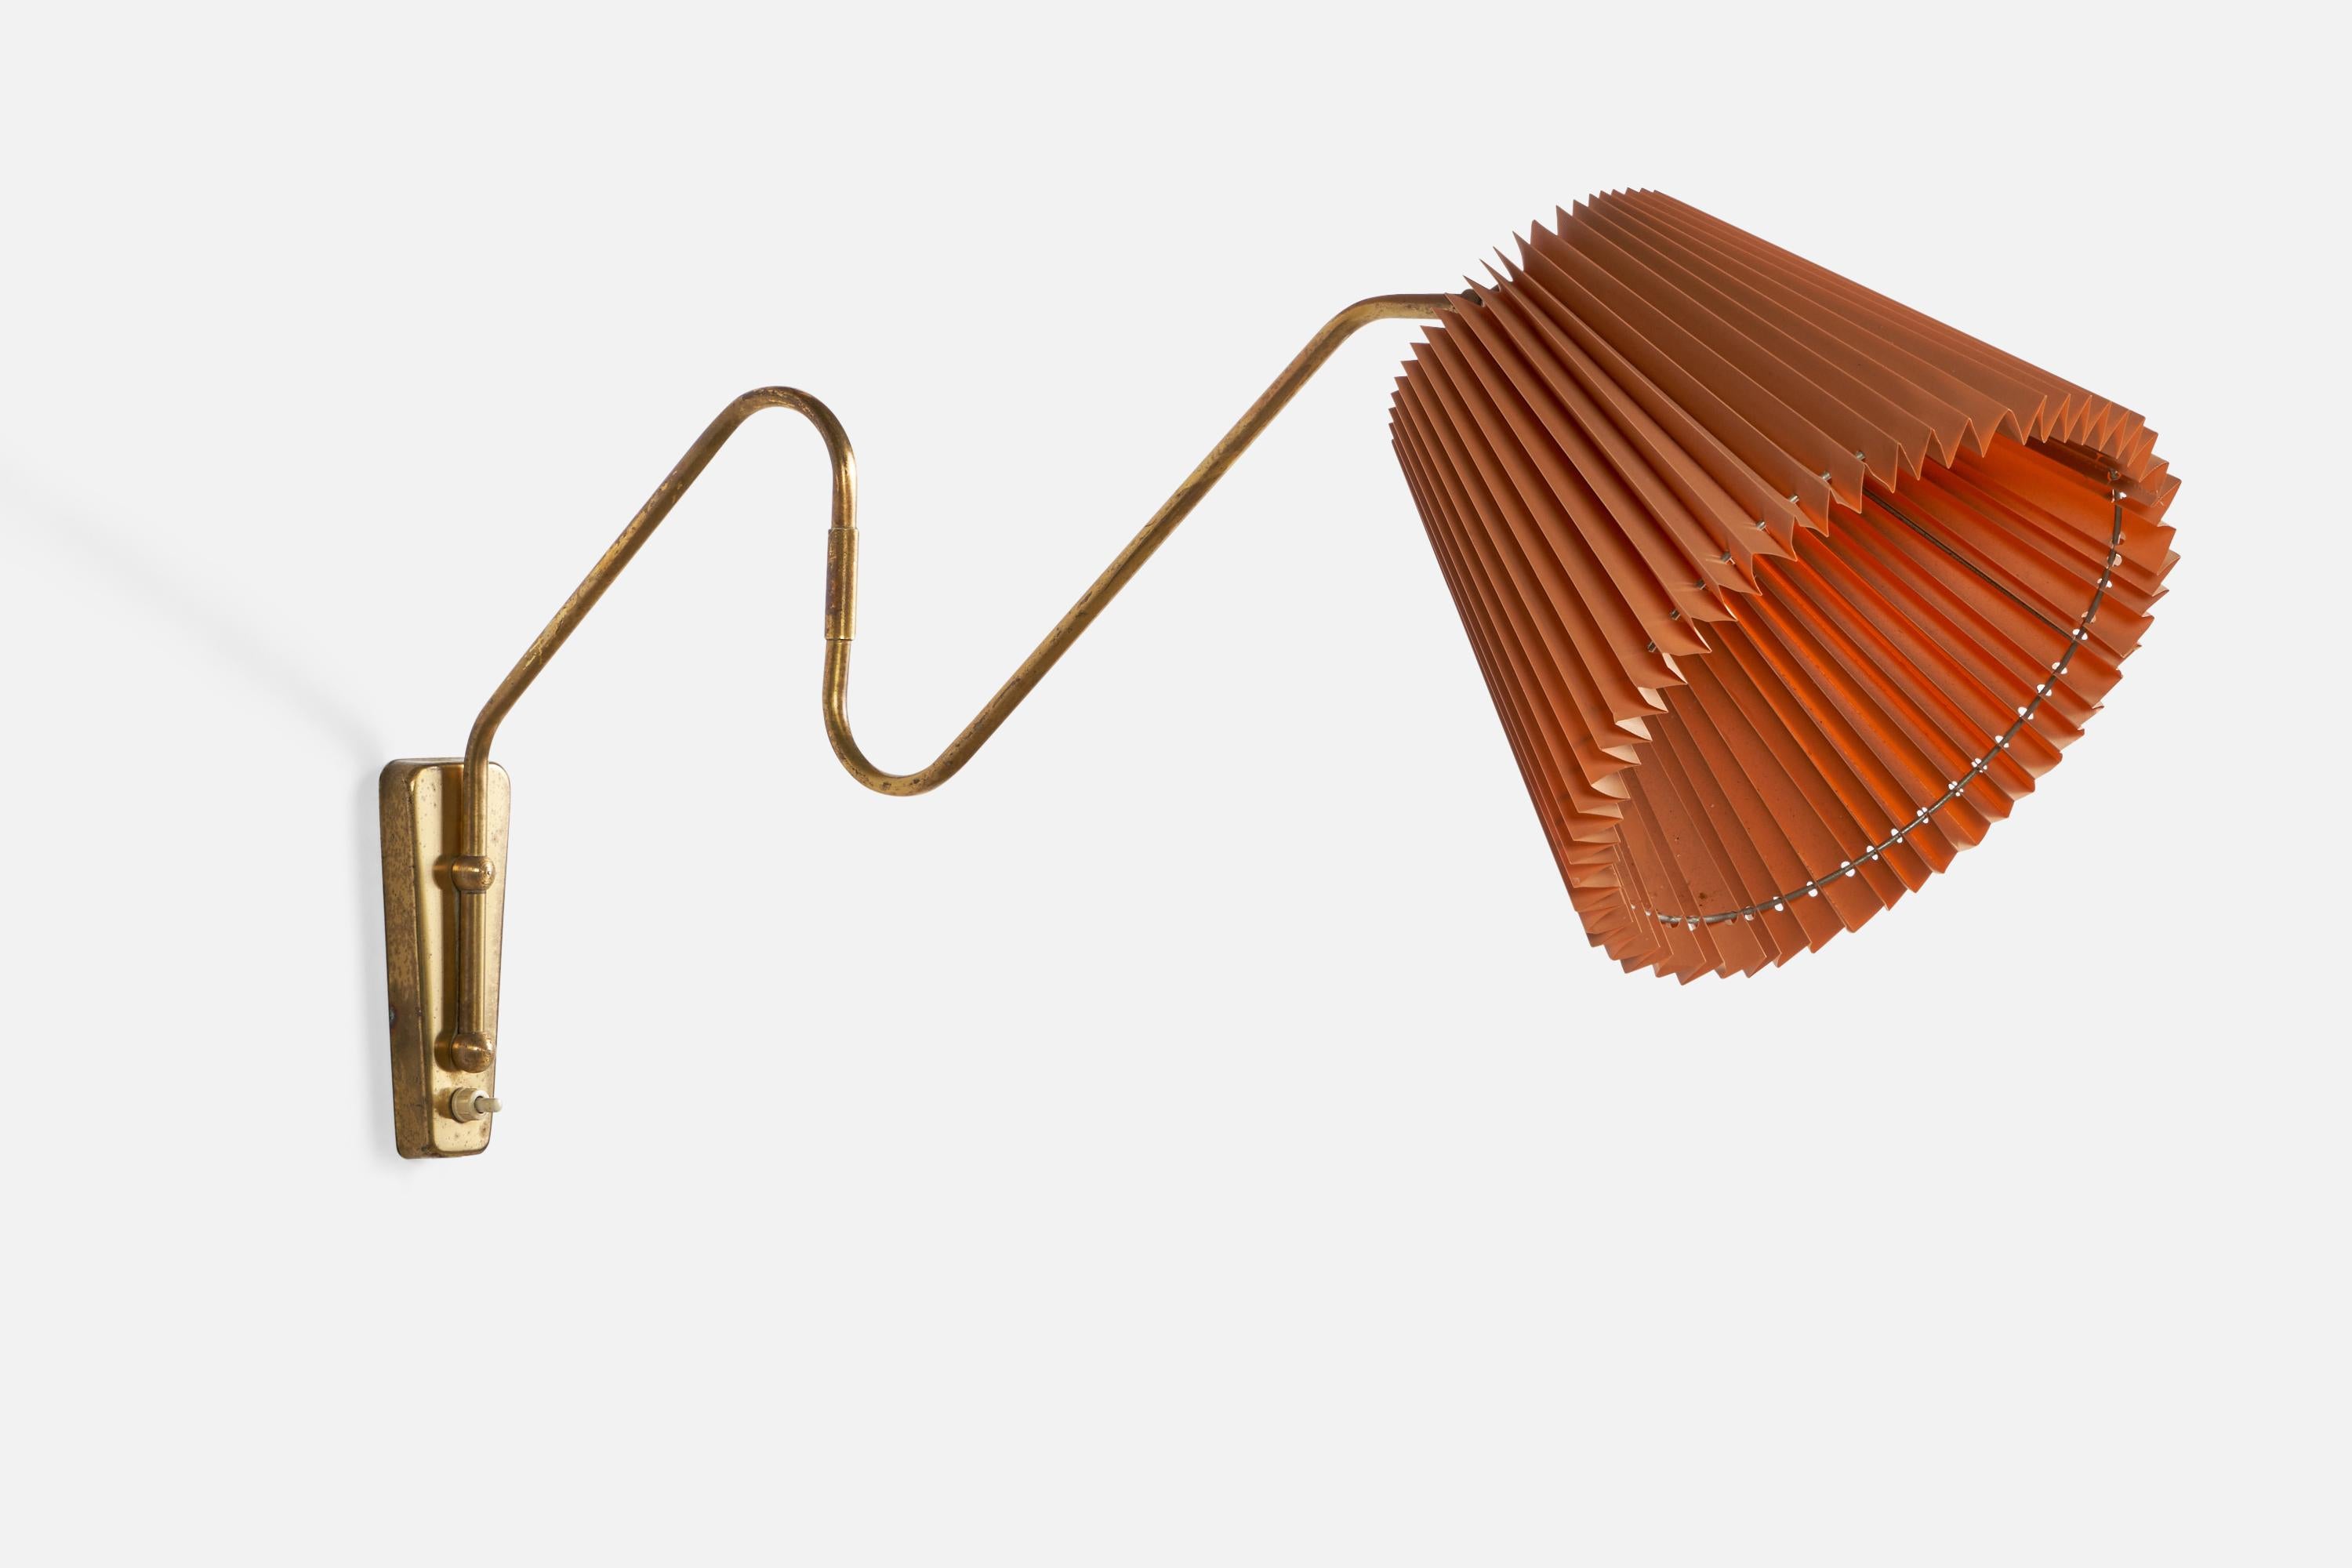 An adjustable brass and red paper wall light designed and produced in Denmark, 1940s.

Overall Dimensions (inches): 13.5” H x 10” W x 28.3” D
Back Plate Dimensions (inches): 6” H x 2.1” W x 0.7” D
Bulb Specifications: E-26 Bulb
Number of Sockets: